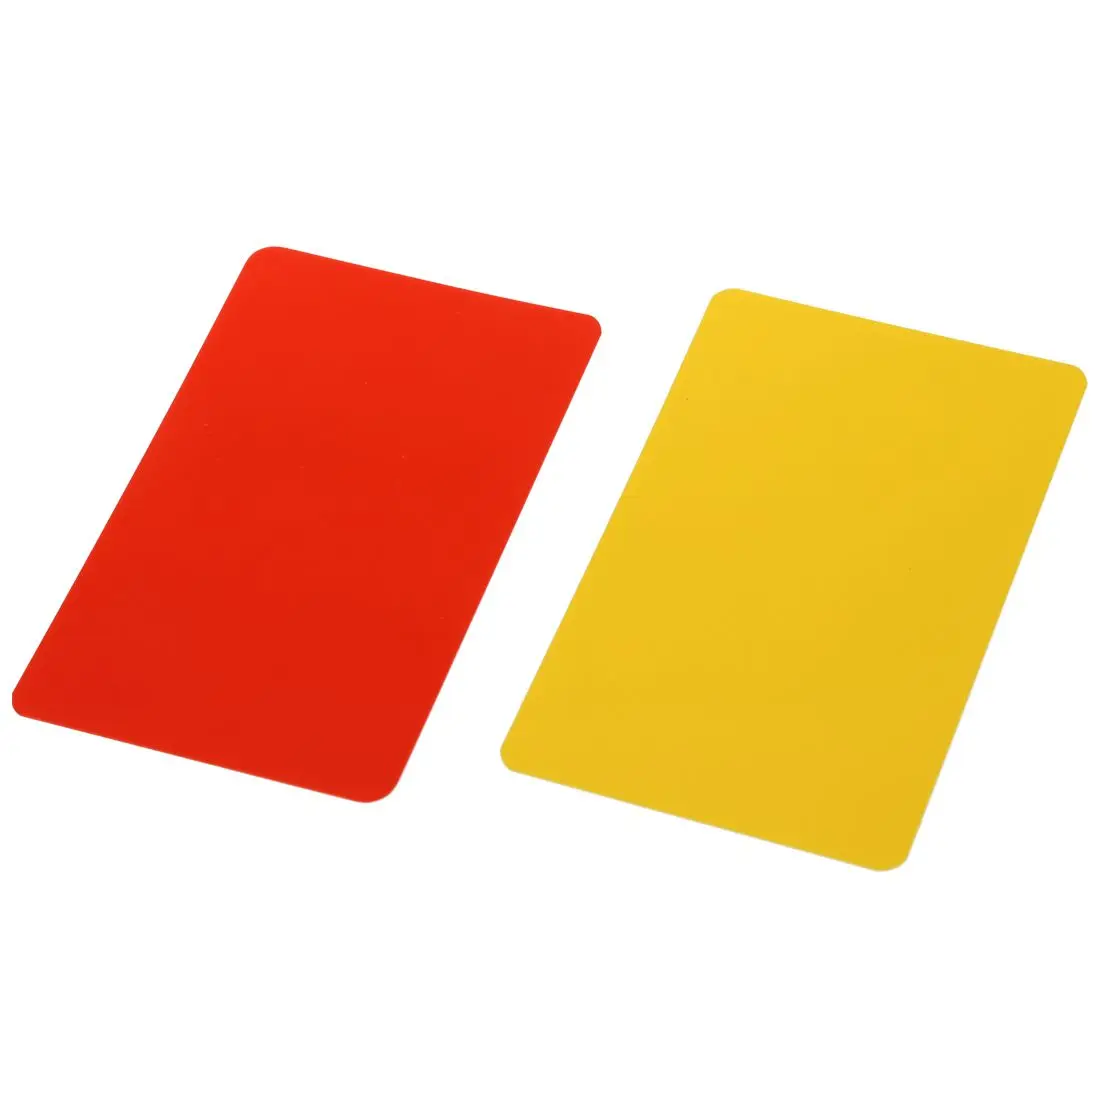 Box for football match referee red and yellow cards | Спорт и